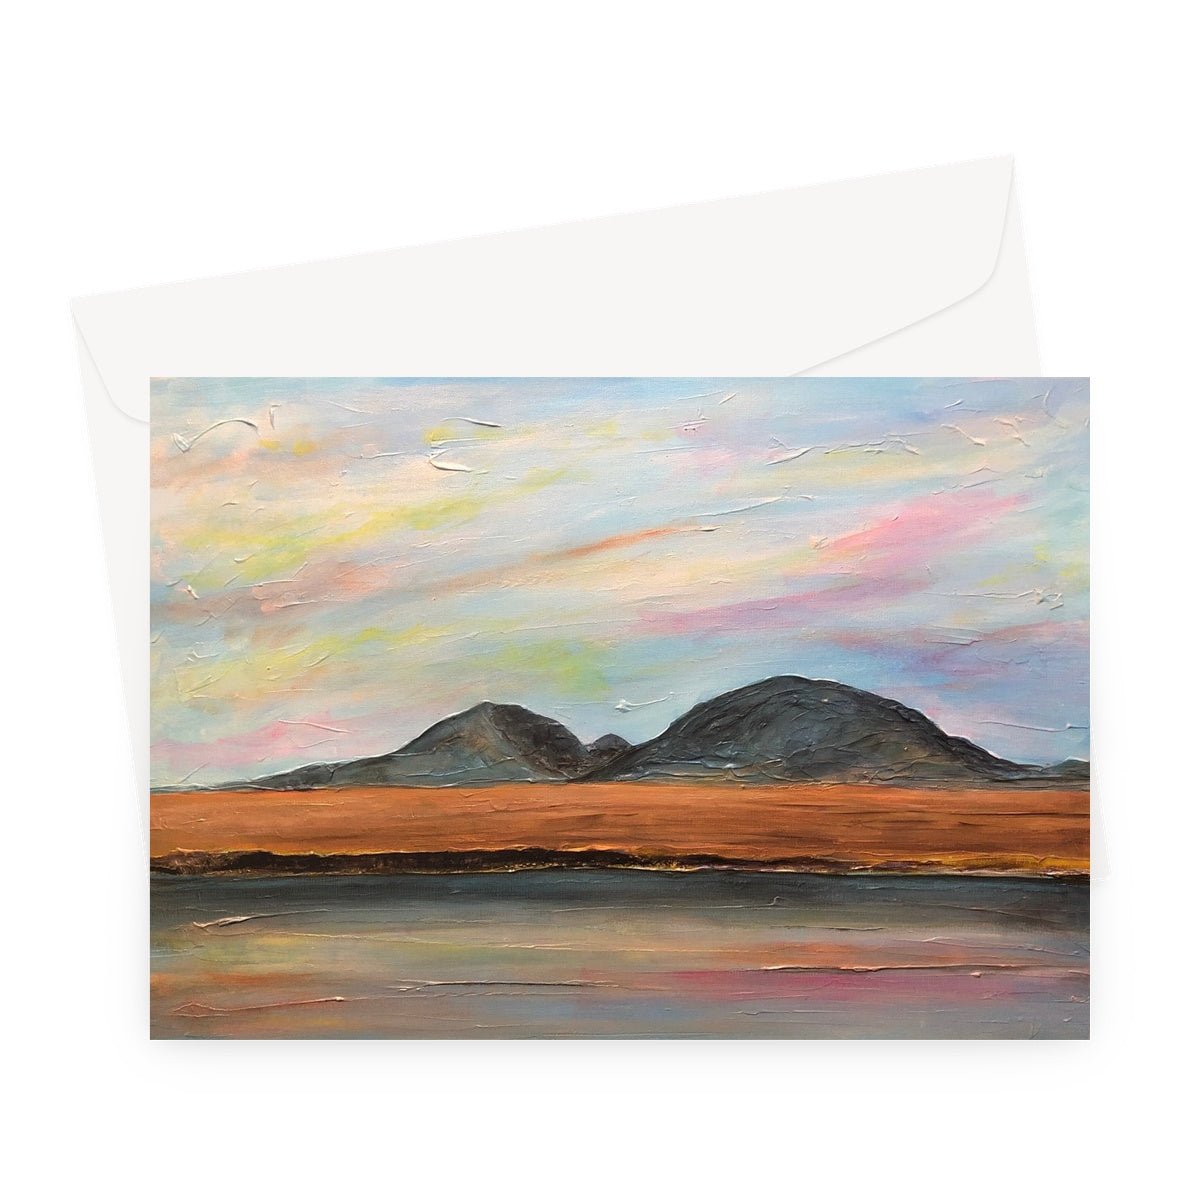 Jura Dawn Art Gifts Greeting Card-Greetings Cards-Hebridean Islands Art Gallery-A5 Landscape-10 Cards-Paintings, Prints, Homeware, Art Gifts From Scotland By Scottish Artist Kevin Hunter